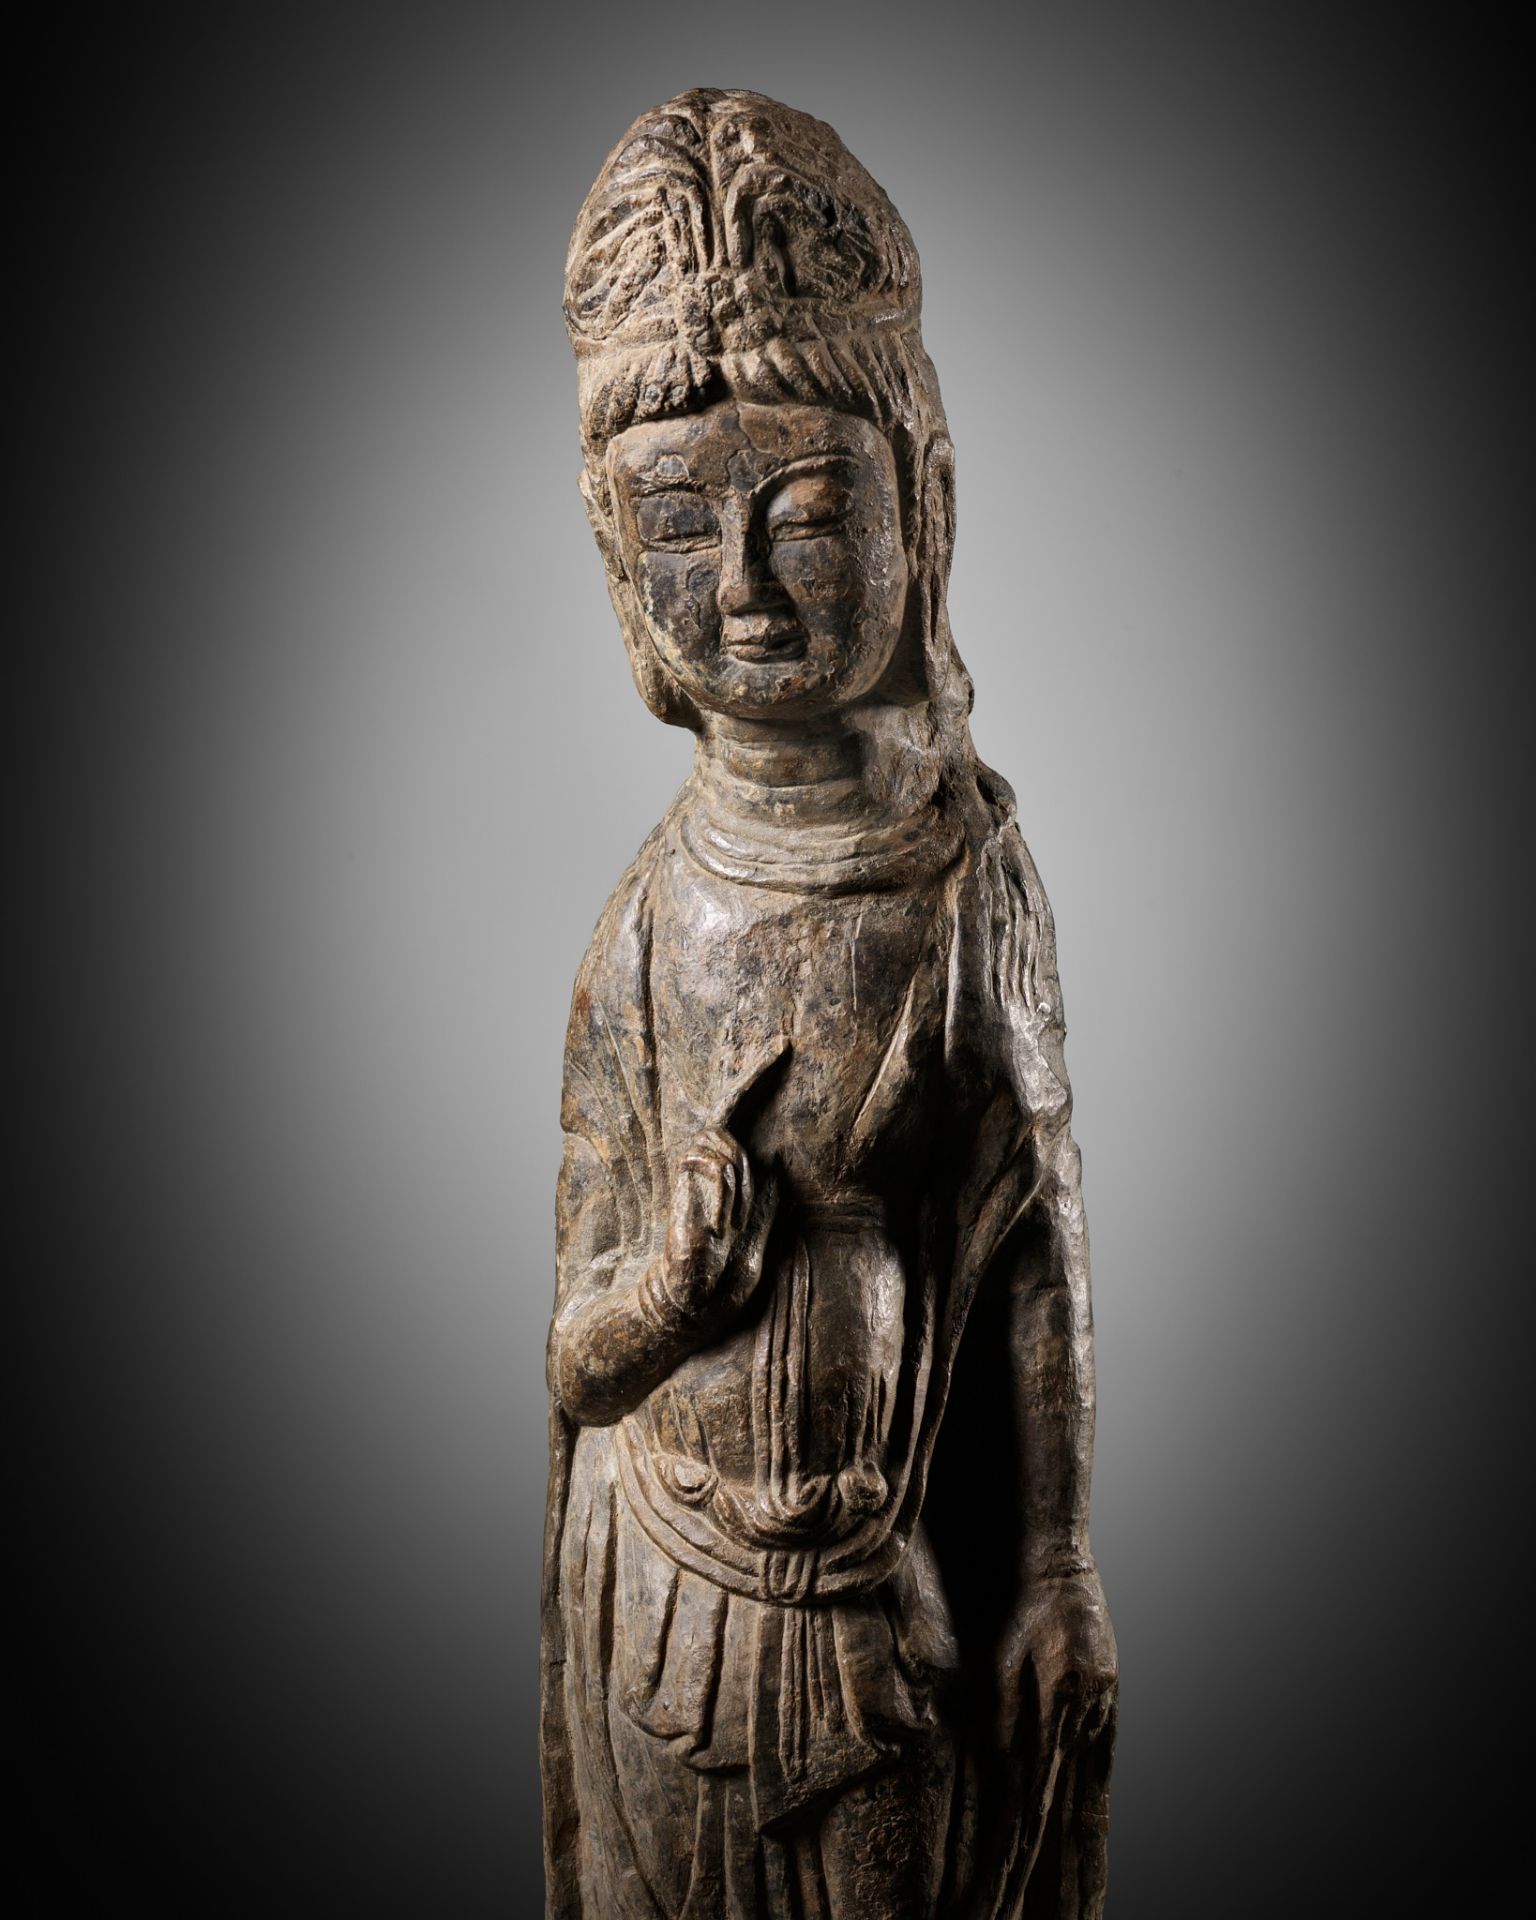 A RARE AND IMPORTANT LIMESTONE FIGURE OF A BODHISATTVA, LONGMEN GROTTOES, NORTHERN WEI DYNASTY